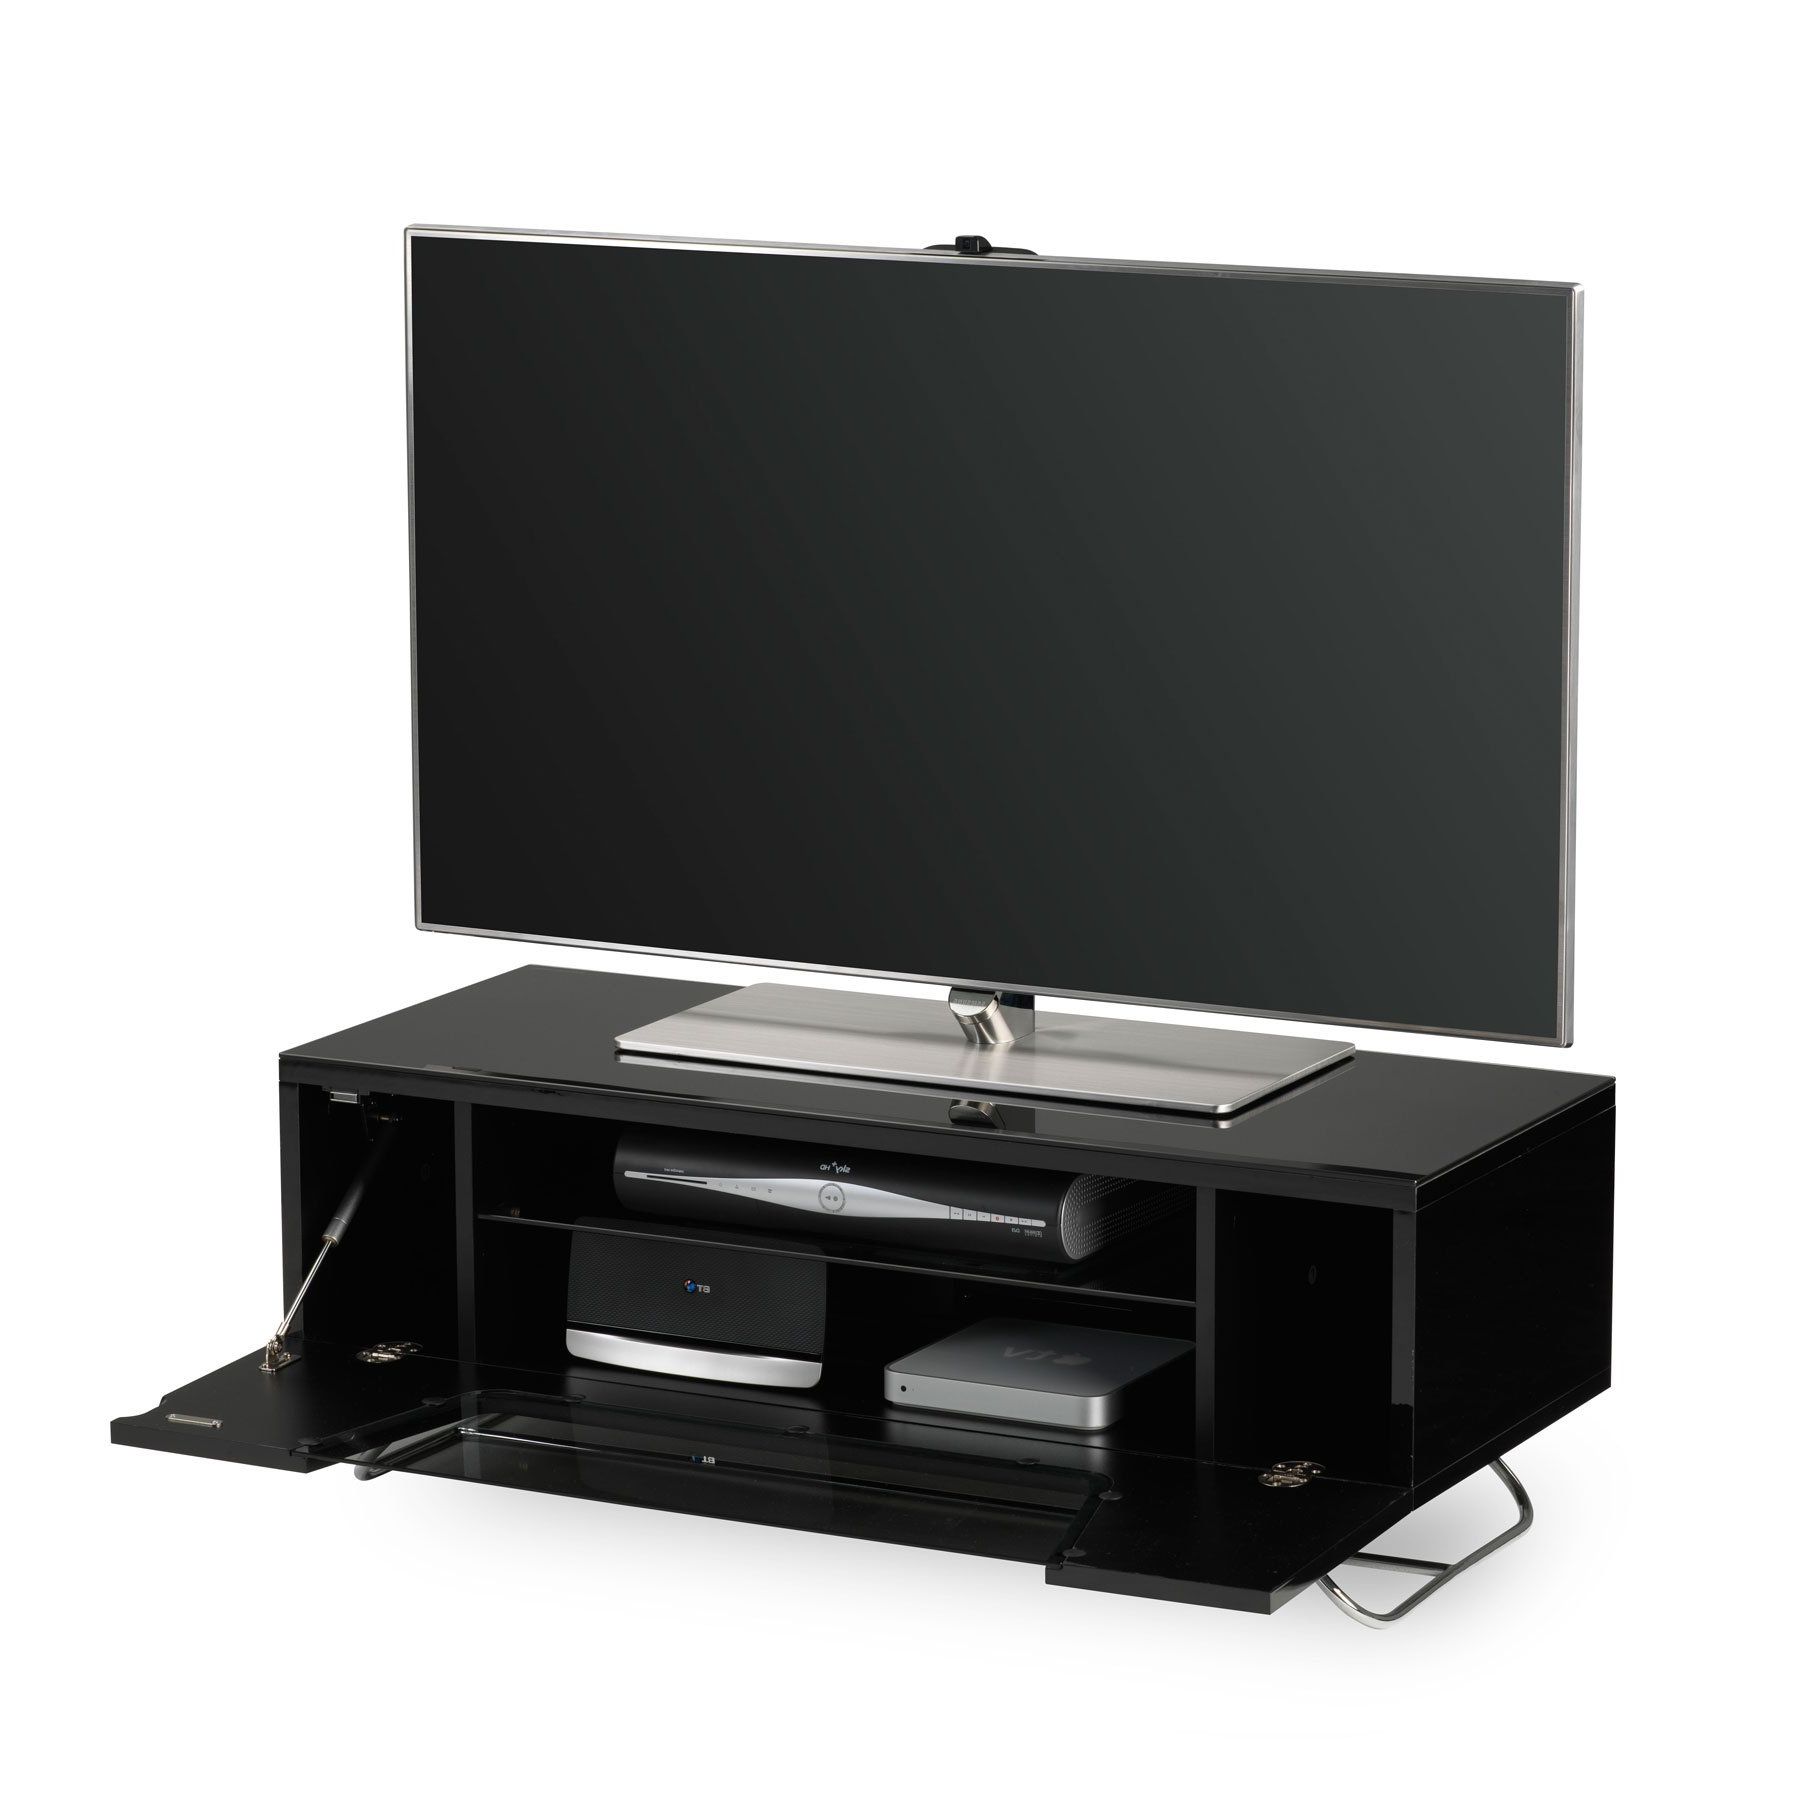 2018 Alphason Chromium 2 100cm Black Tv Stand For Up To 50" Tvs With Regard To Mclelland Tv Stands For Tvs Up To 50" (View 11 of 25)